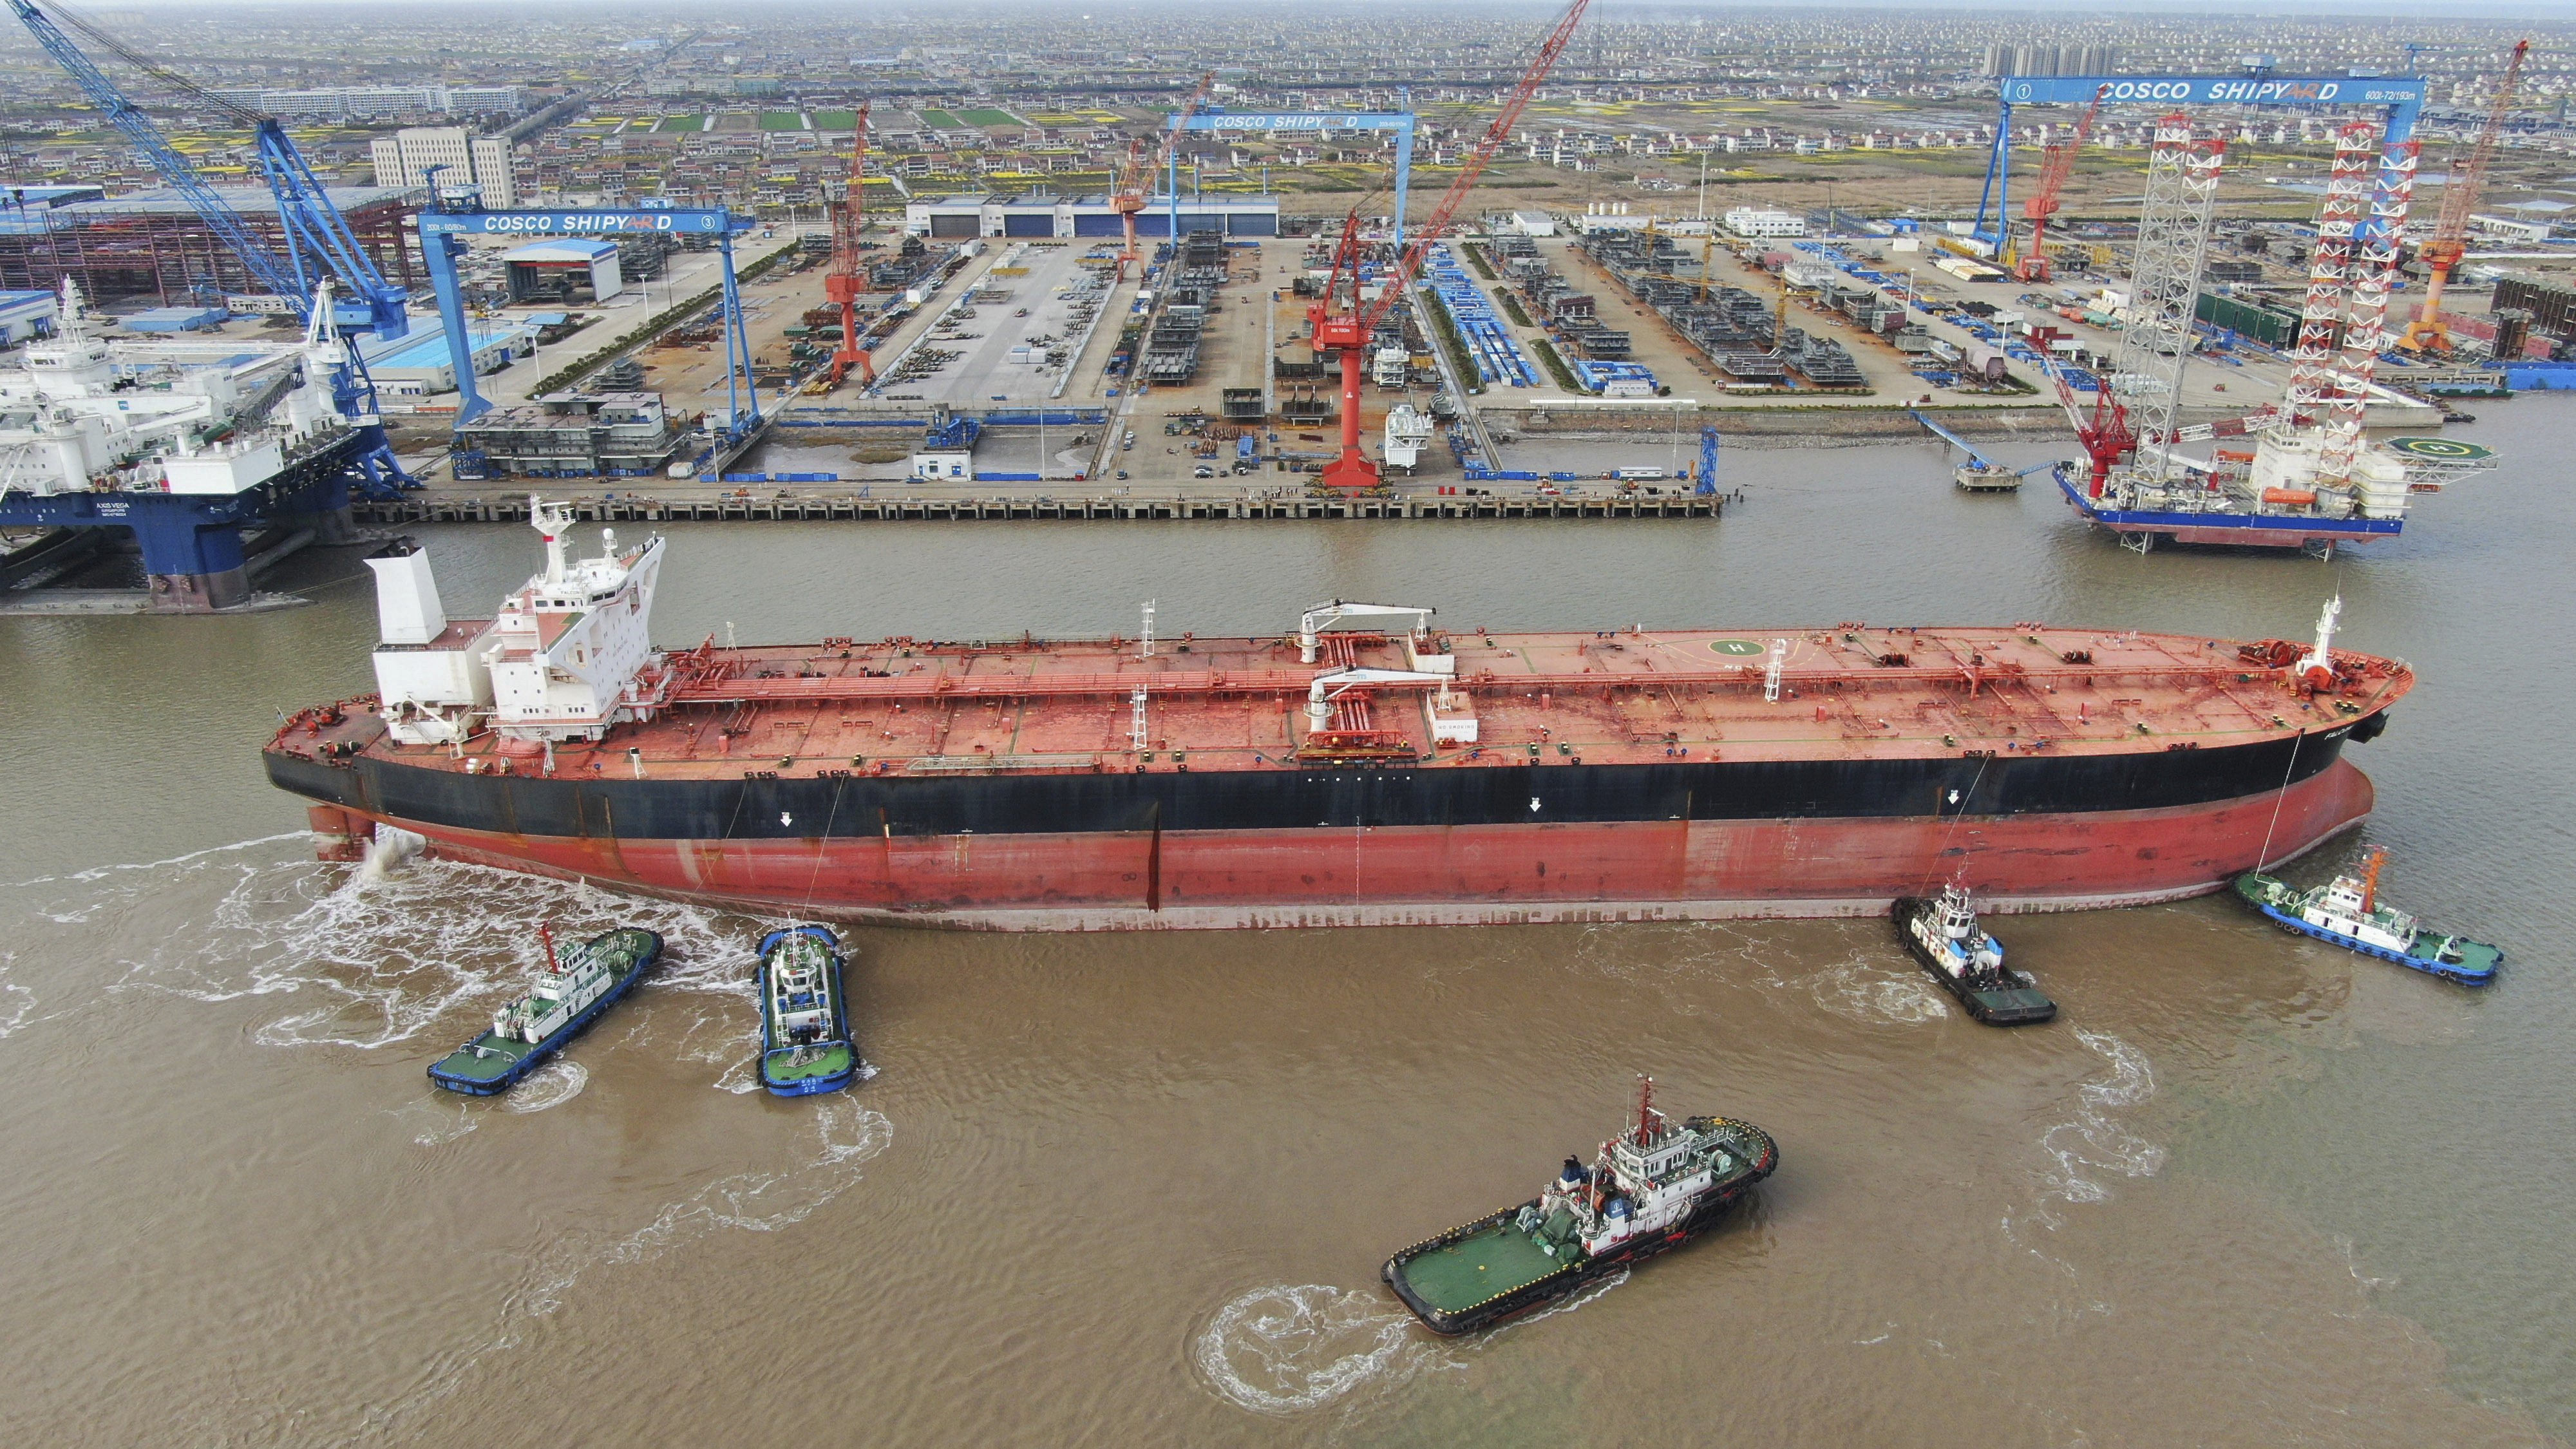 Tugboats nudging a 300,000-ton very large crude carrier (VLCC) to a shipyard on the Yangtze River for retrofitting in Qidong city in eastern China’s Jiangsu province on March 16, 2020. Photo: Chinatopix via AP.